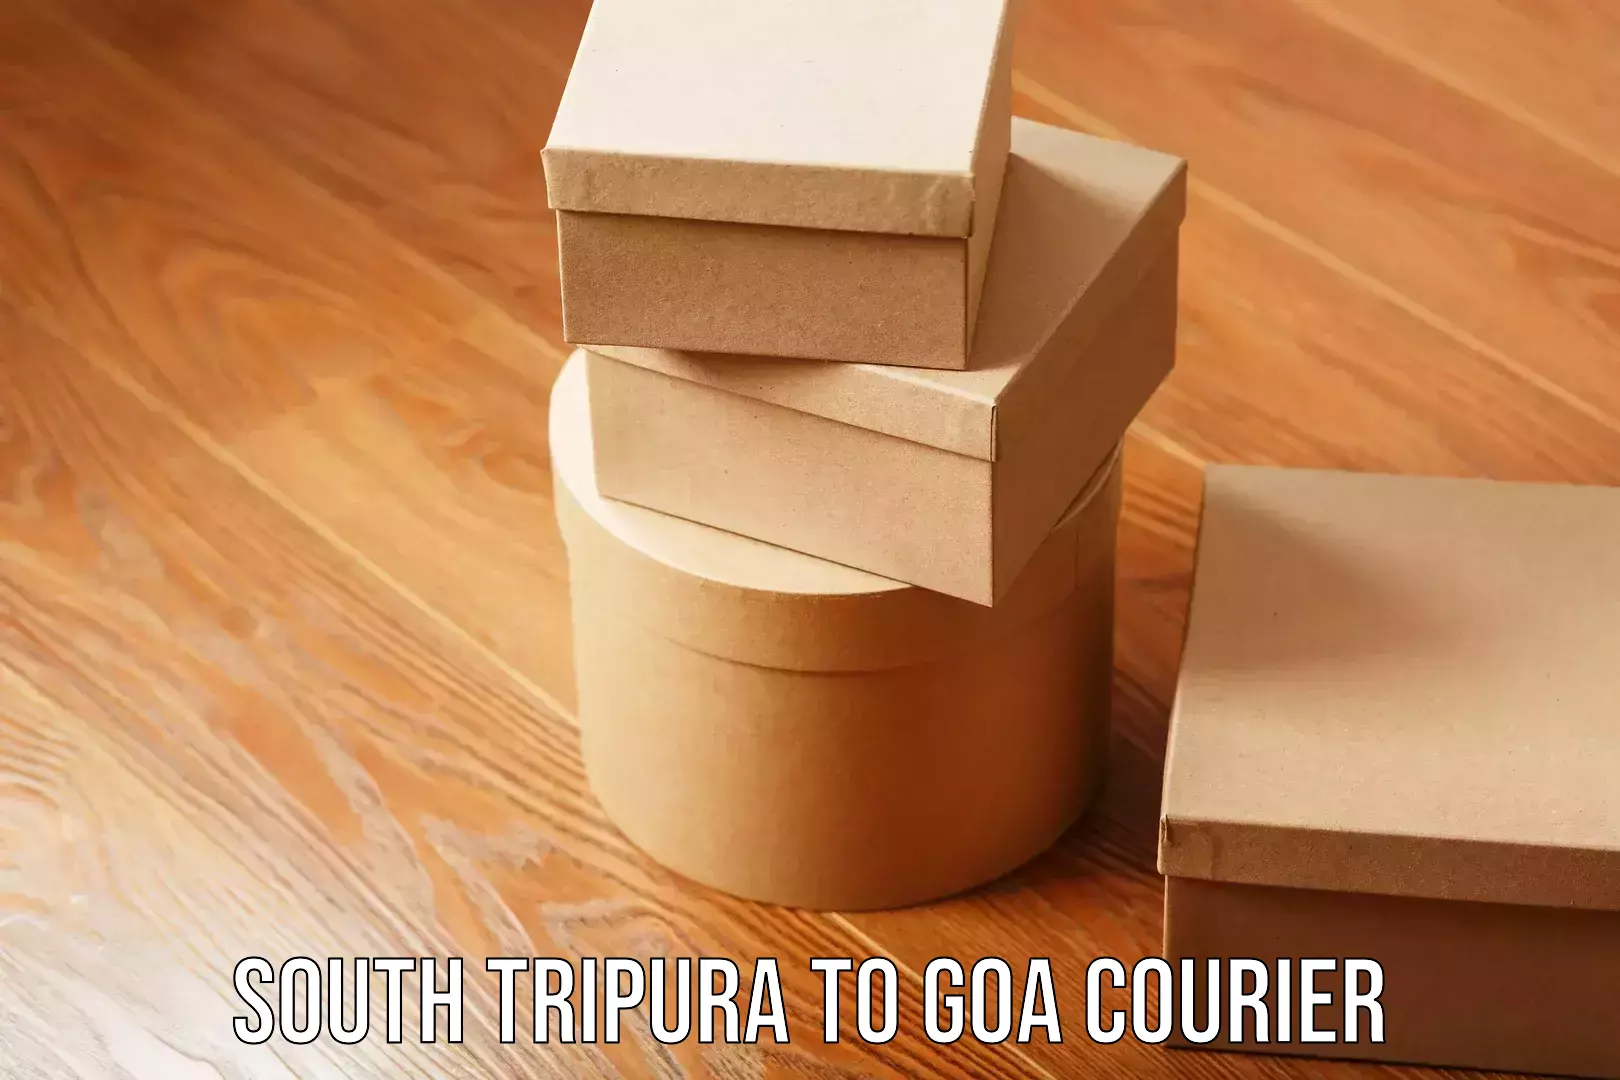 Online package tracking South Tripura to Goa